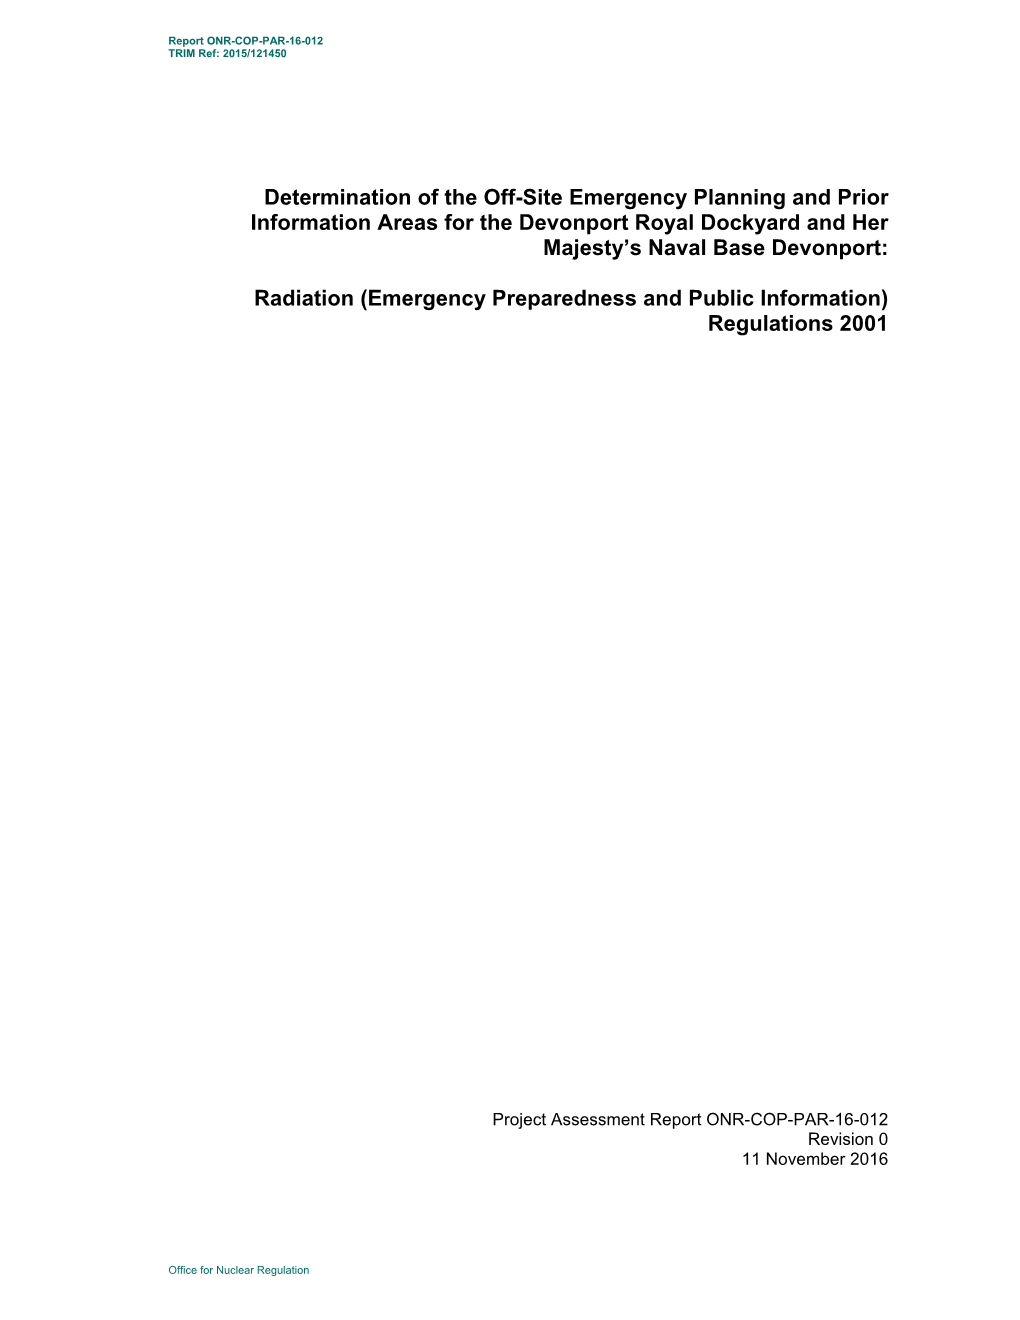 Determination of the Off-Site Emergency Planning and Prior Information Areas for the Devonport Royal Dockyard and Her Majesty’S Naval Base Devonport